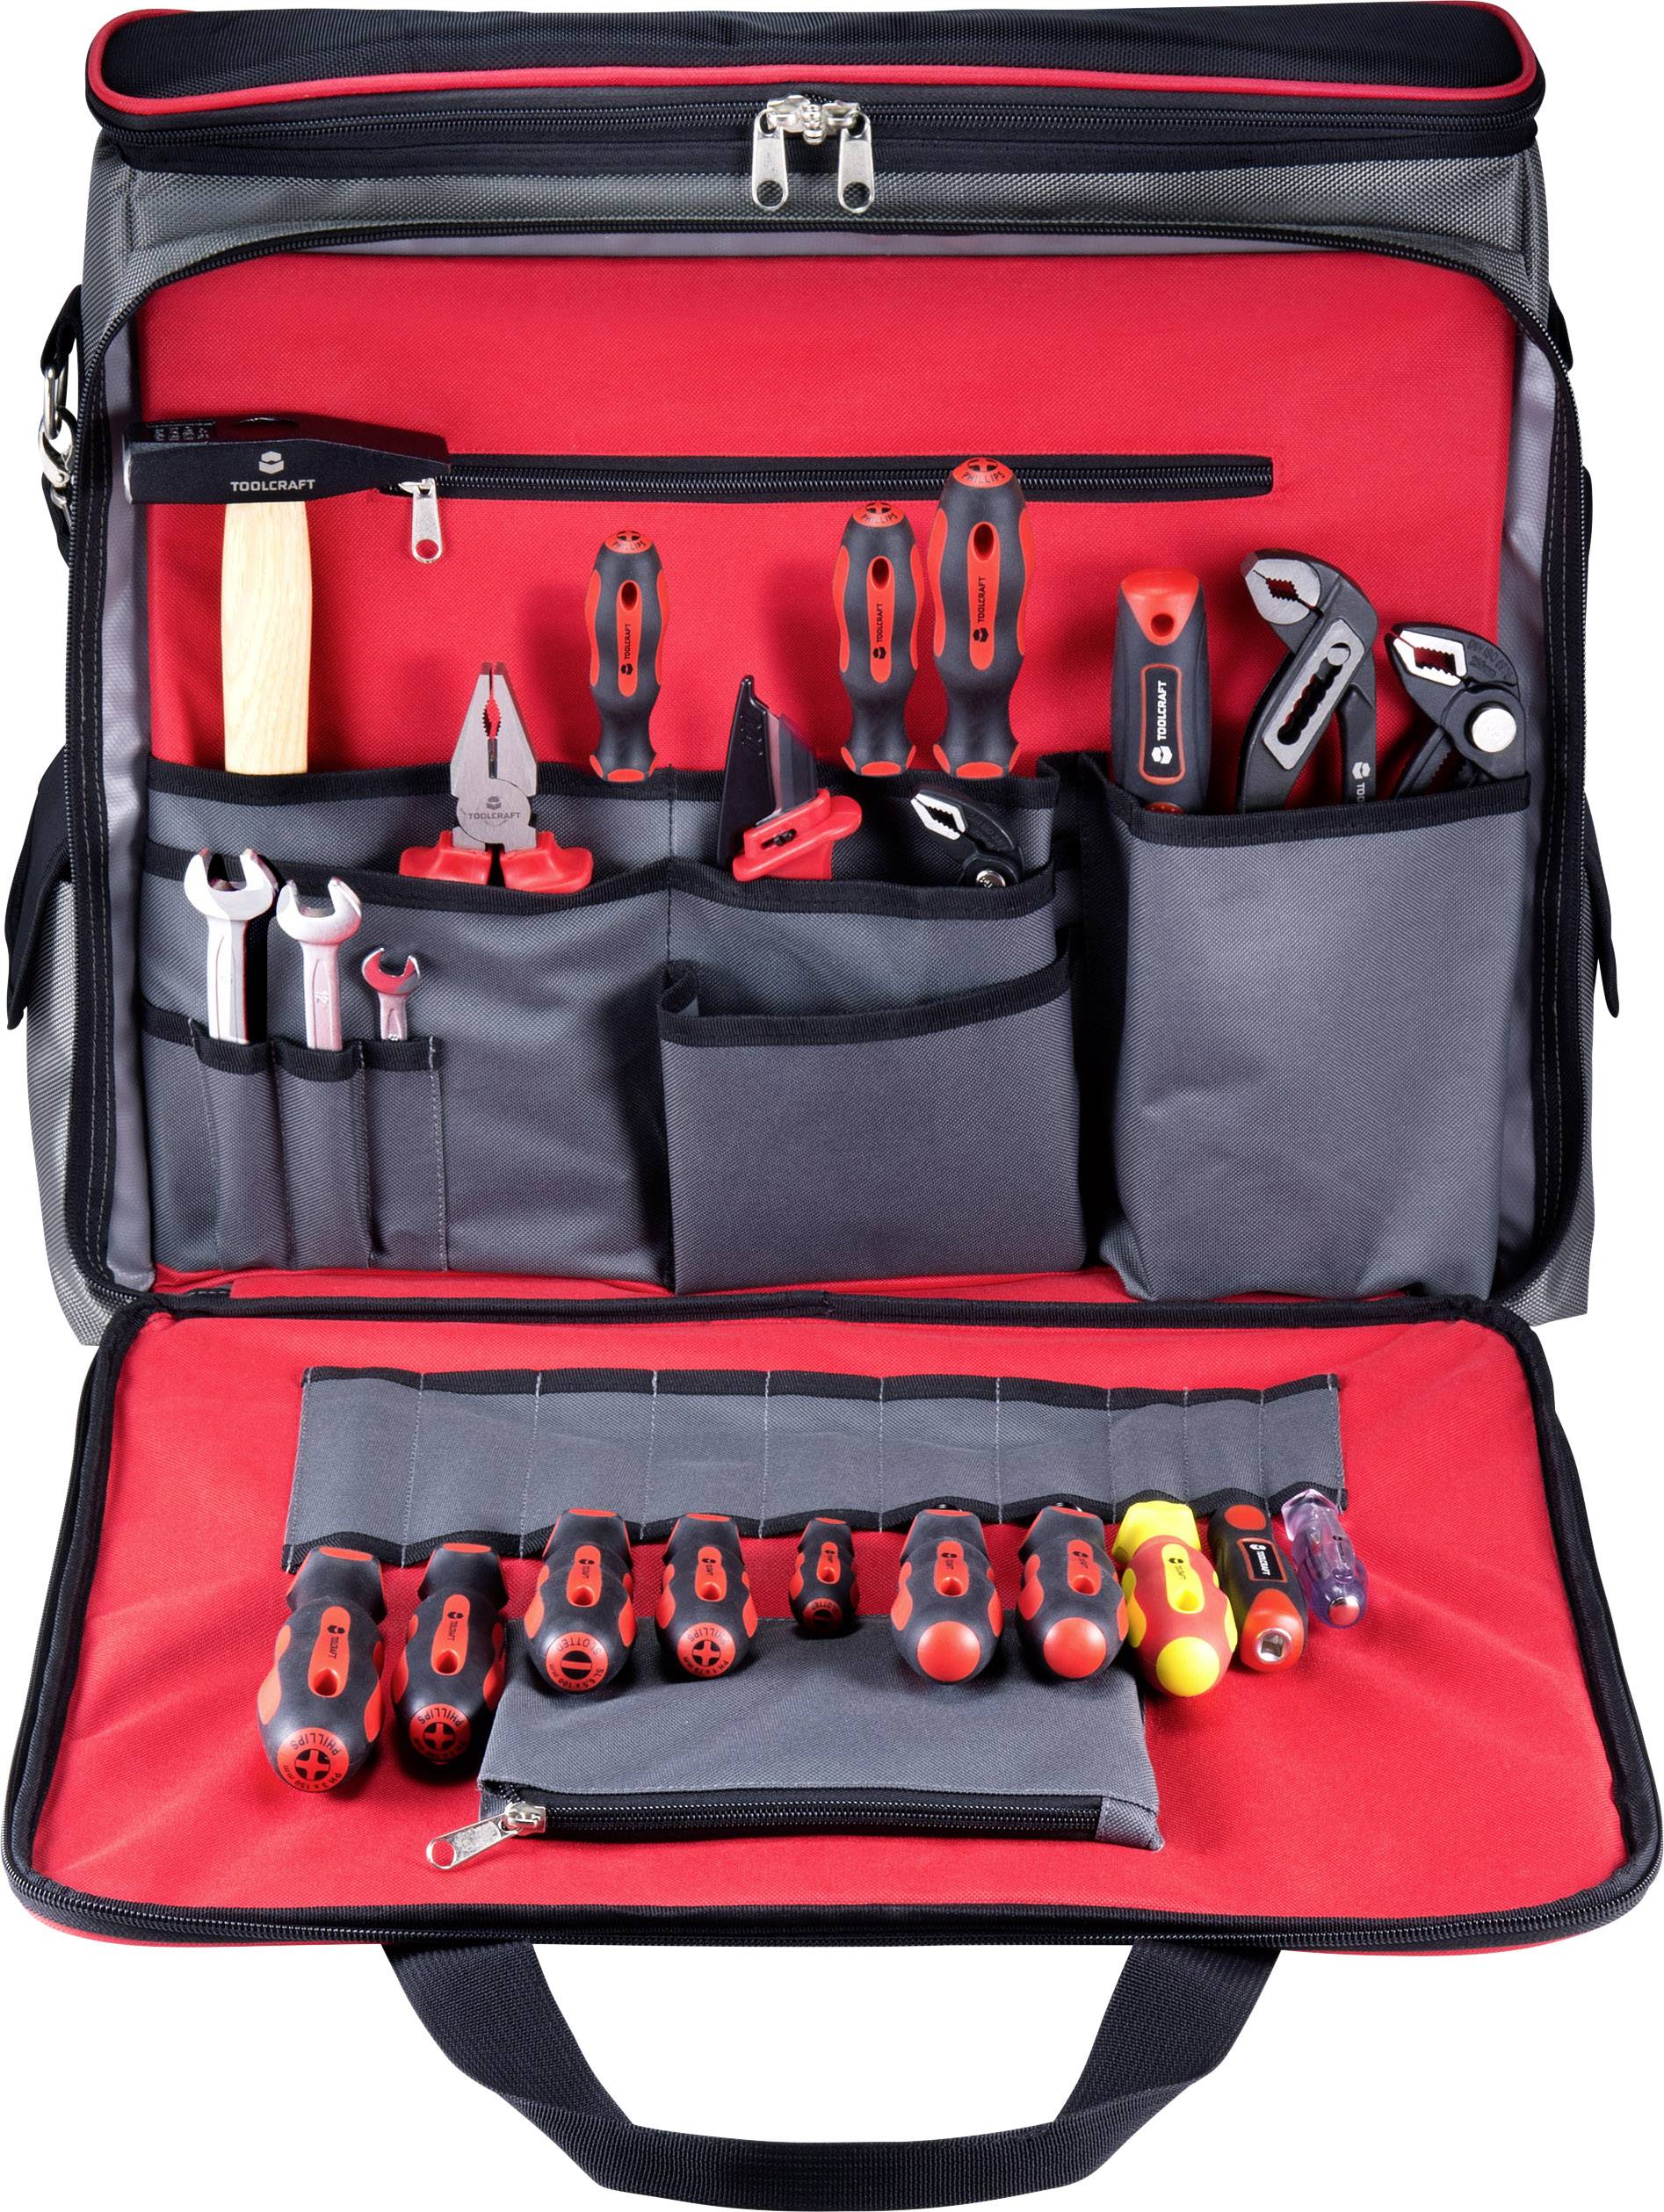 Buy Hi-Spec 18pc Pink Kids Tool Kit Set & Child Size Tool Bag. Real Metal  Hand Tools for DIY Building, Woodwork & Construction Online at Low Prices  in India - Amazon.in